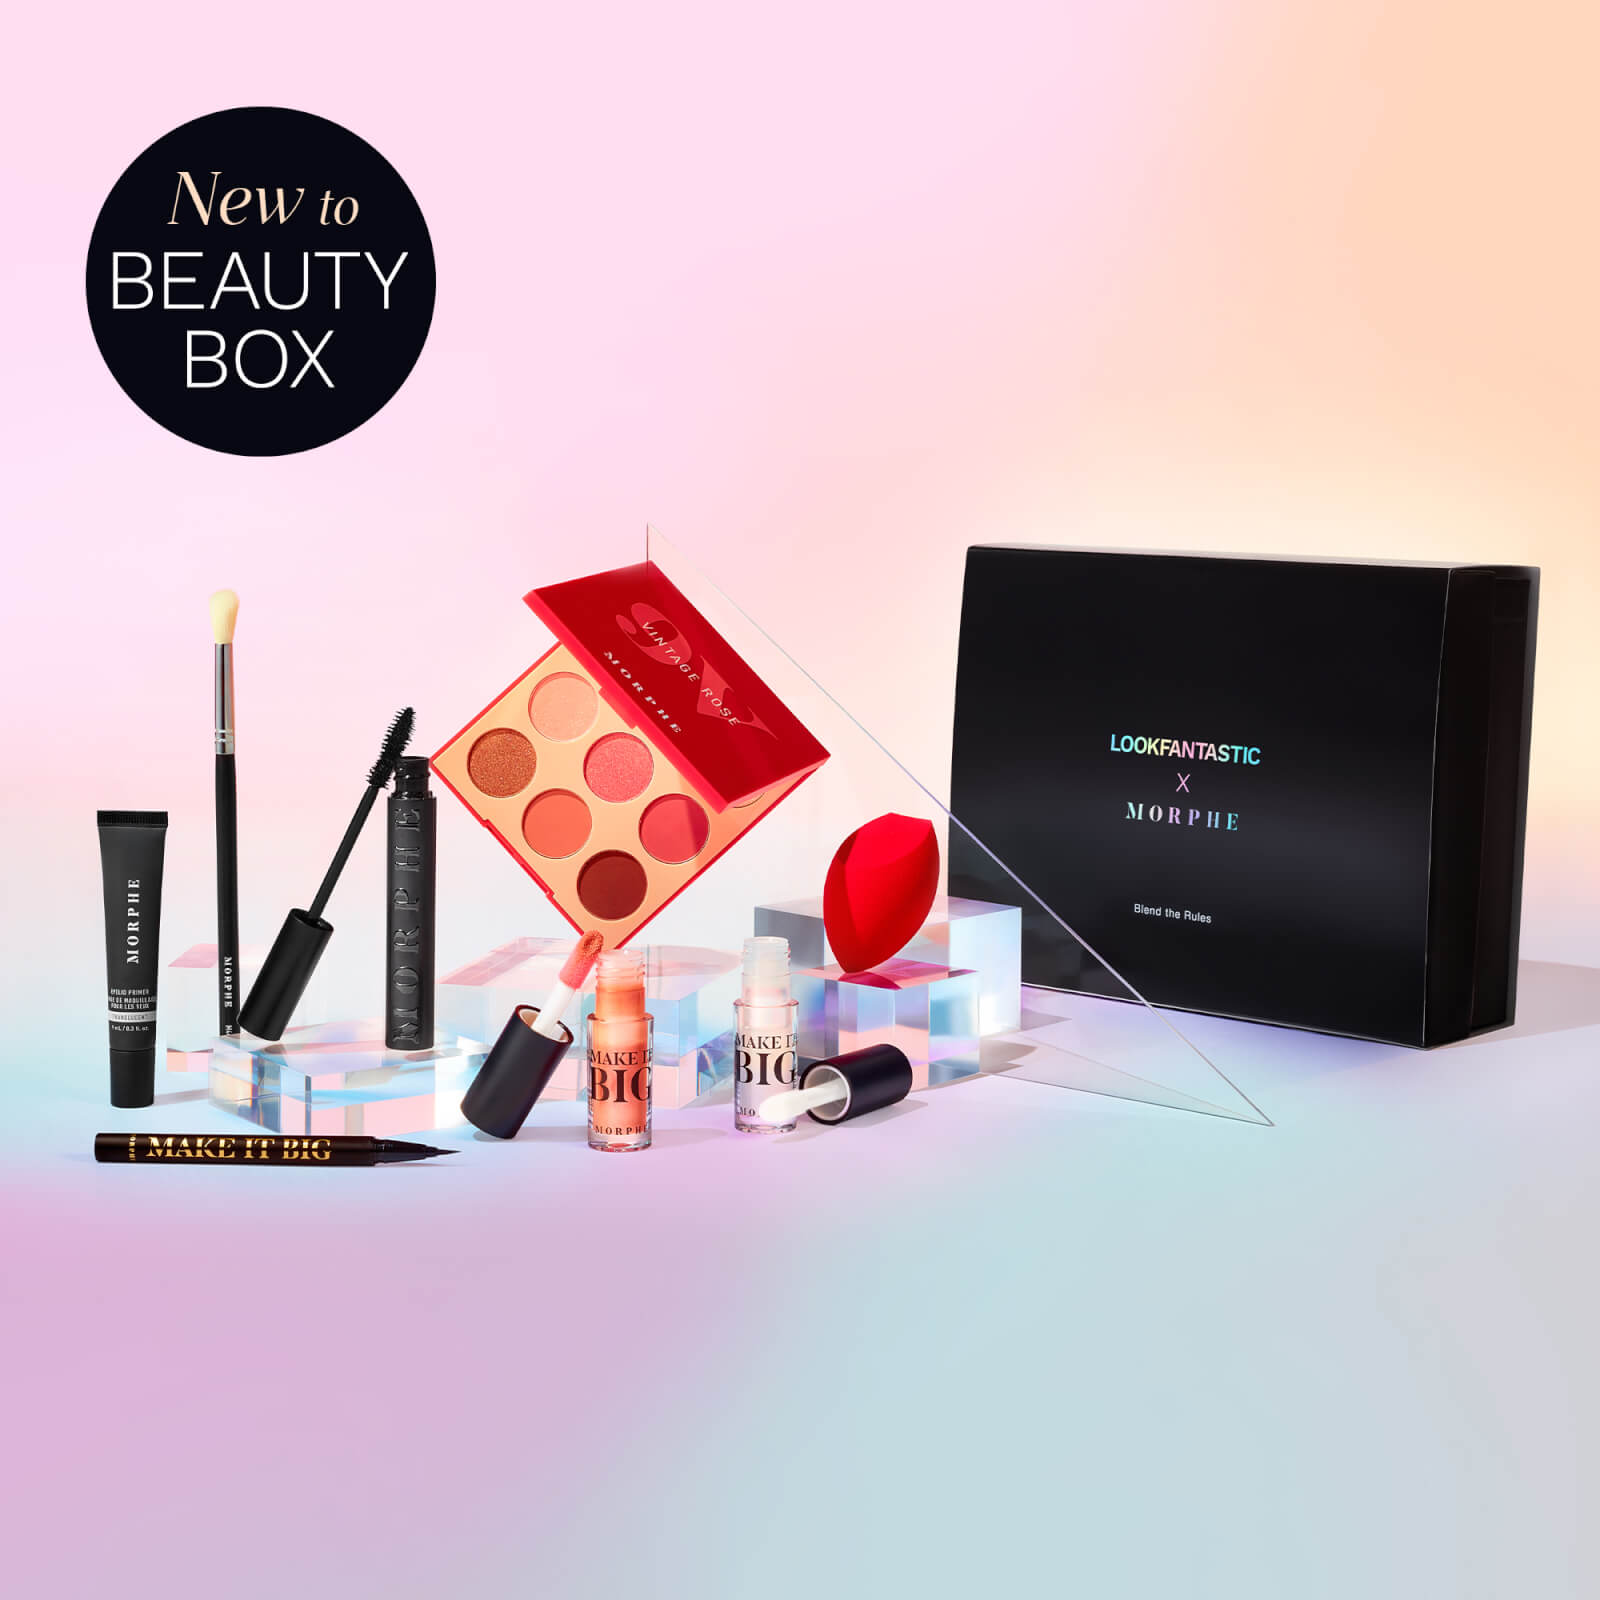 LOOKFANTASTIC x Morphe Limited Edition (Worth over £73)